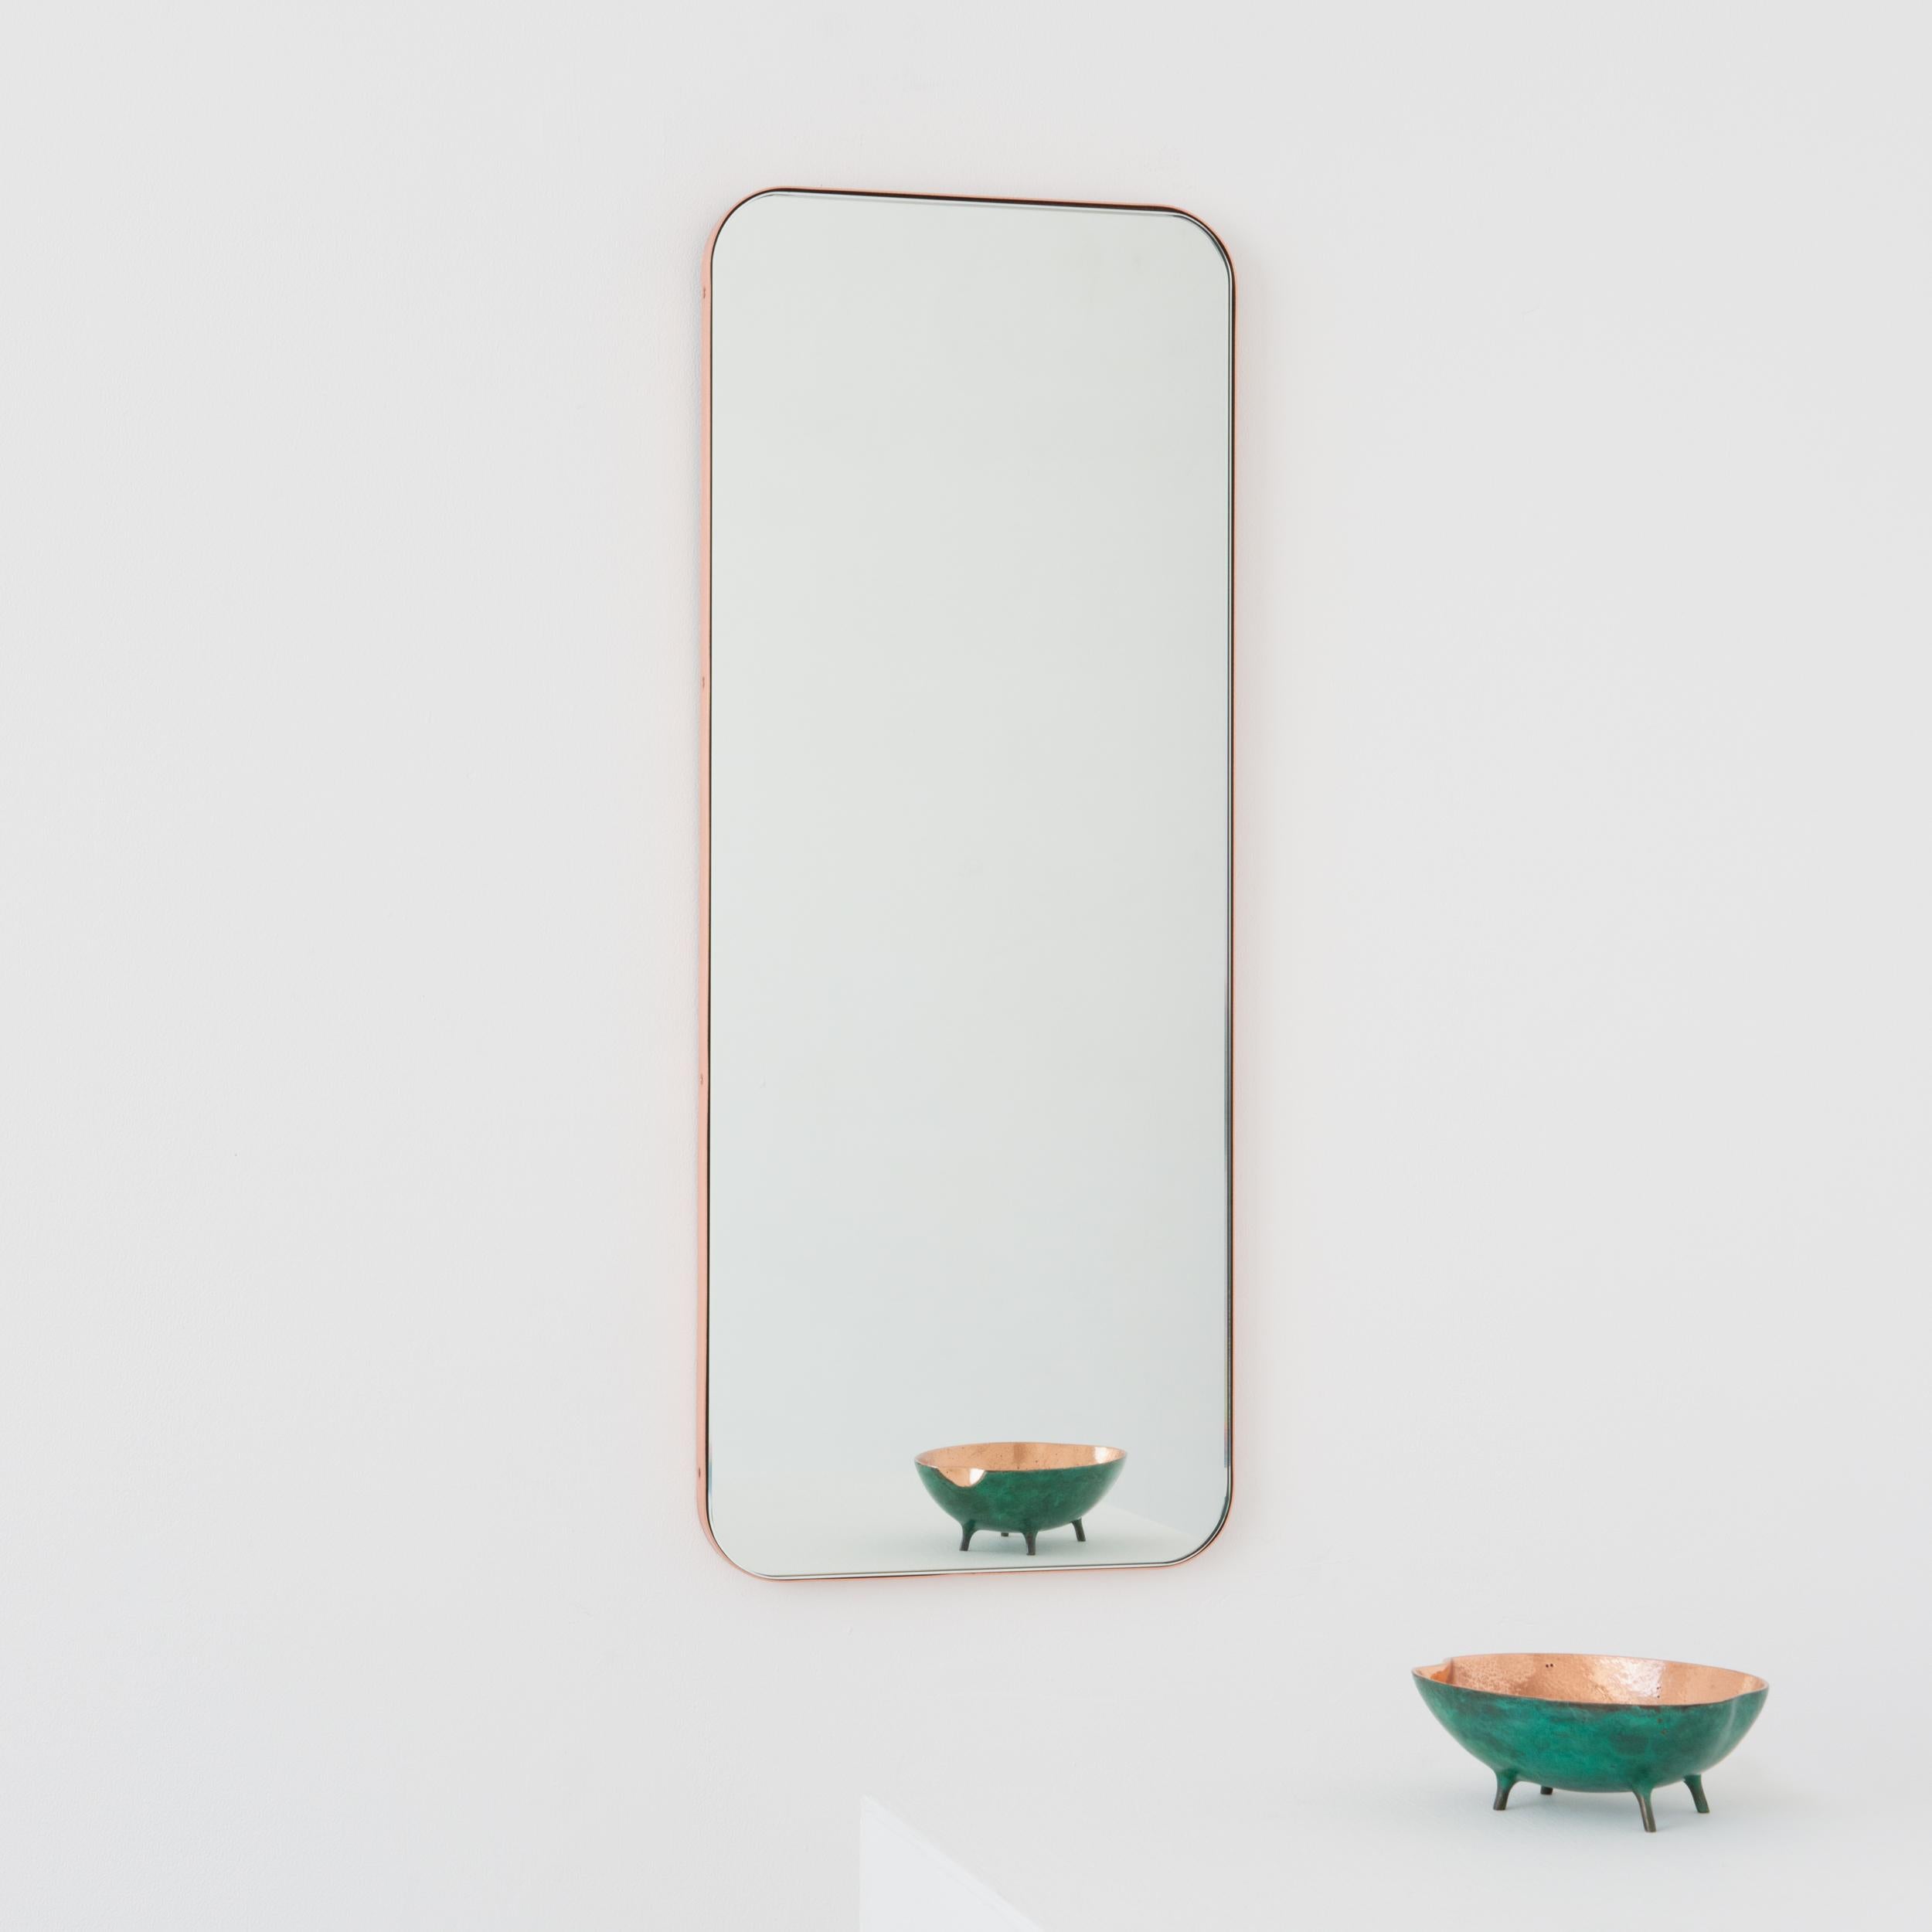 Modern rectangular mirror with an elegant solid brushed copper frame. Part of the charming Quadris collection, designed and handcrafted in London, UK. 

Medium, large and extra-large (37cm x 56cm, 46cm x 71cm and 48cm x 97cm) mirrors are fitted with